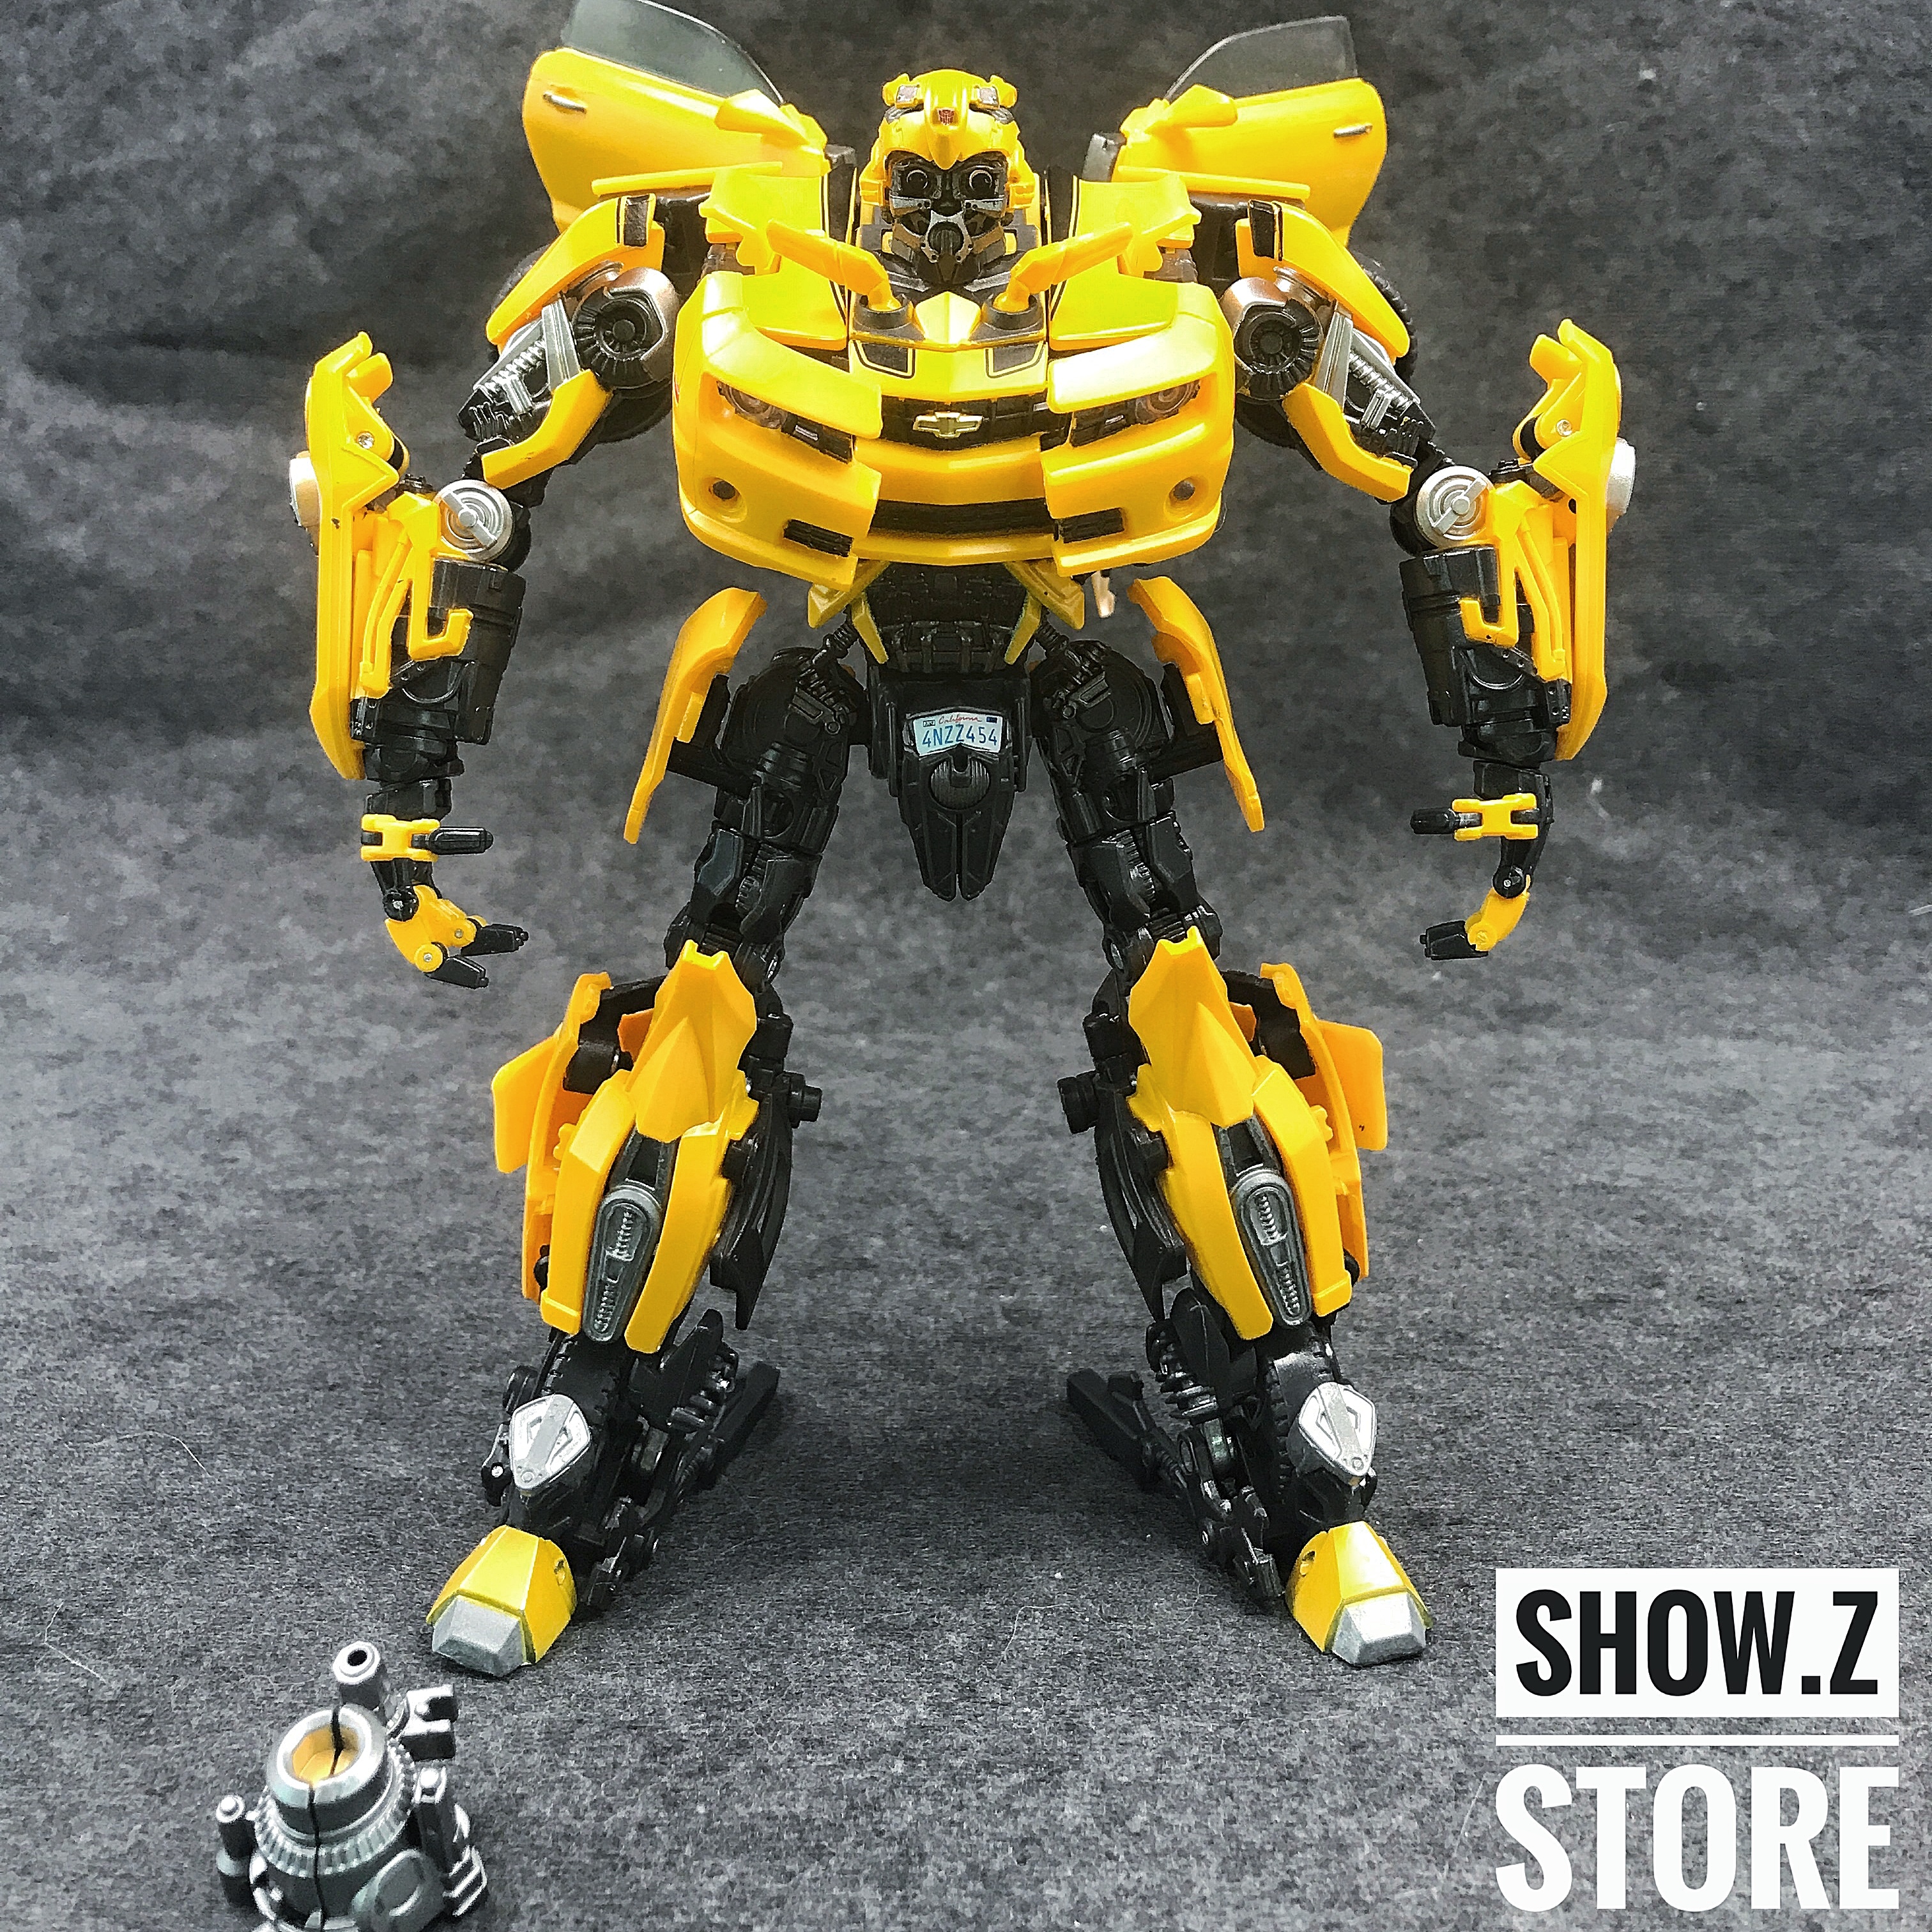 Wei Jiang Transformers Enlarged version MPM03 Bumblebee With oversized 